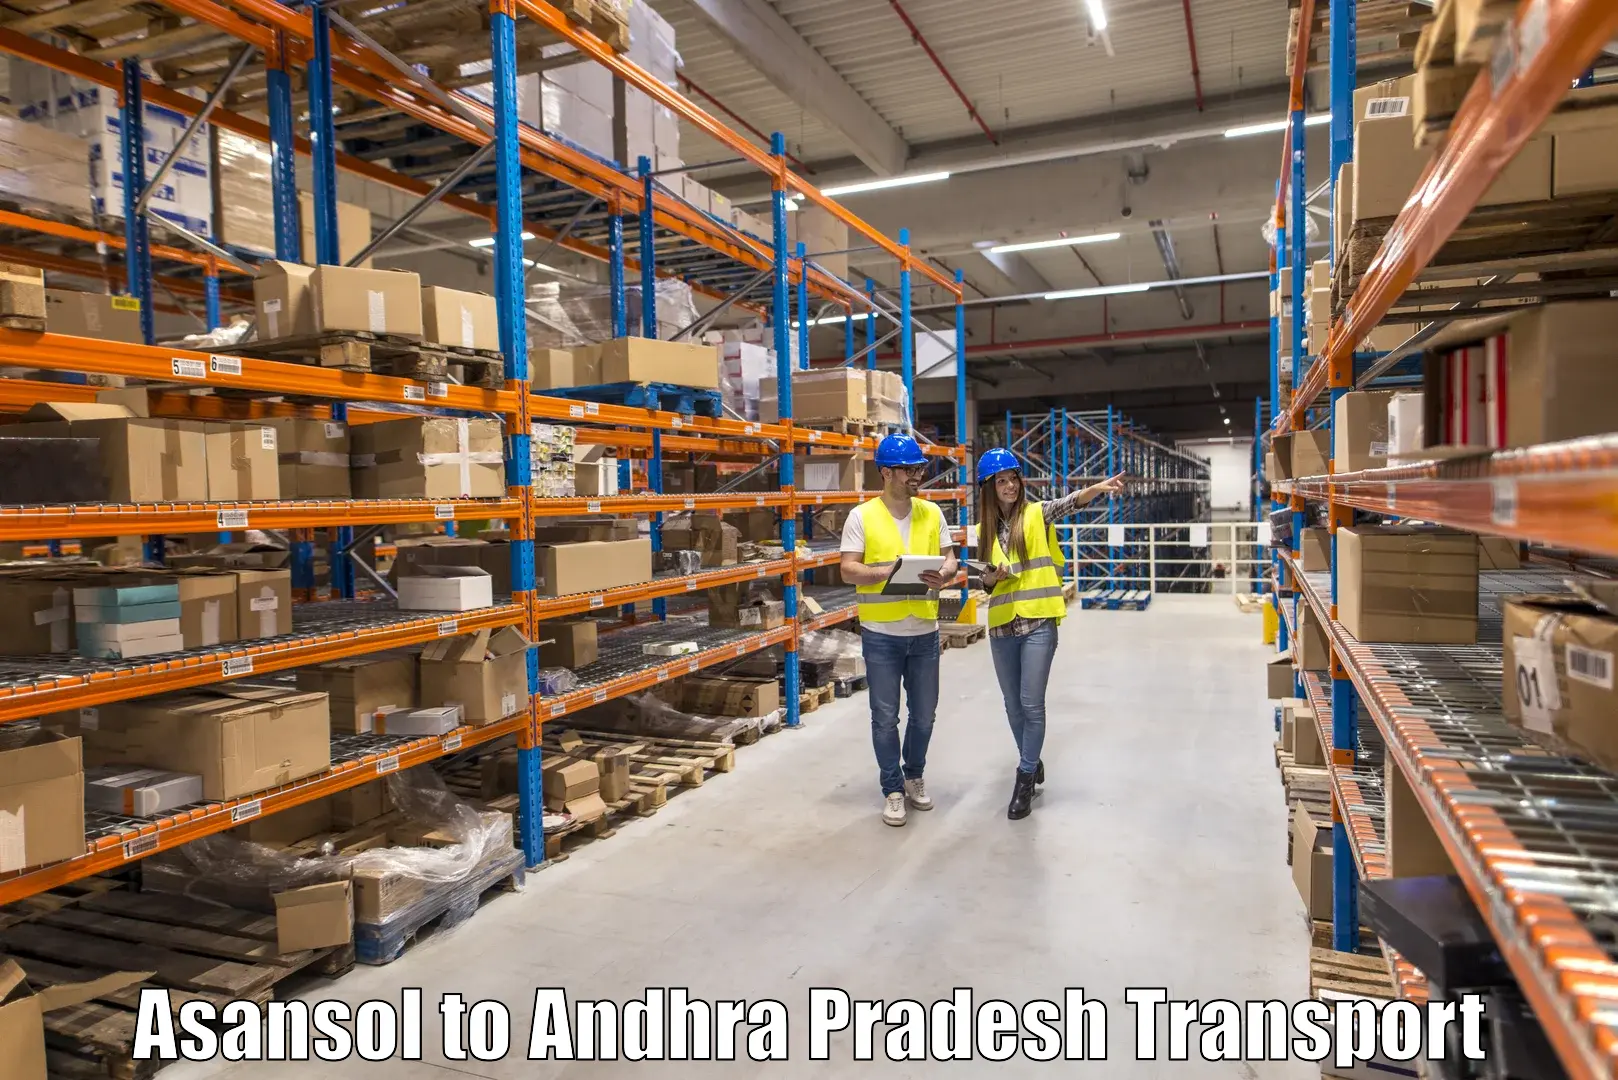 Part load transport service in India Asansol to Pathapatnam